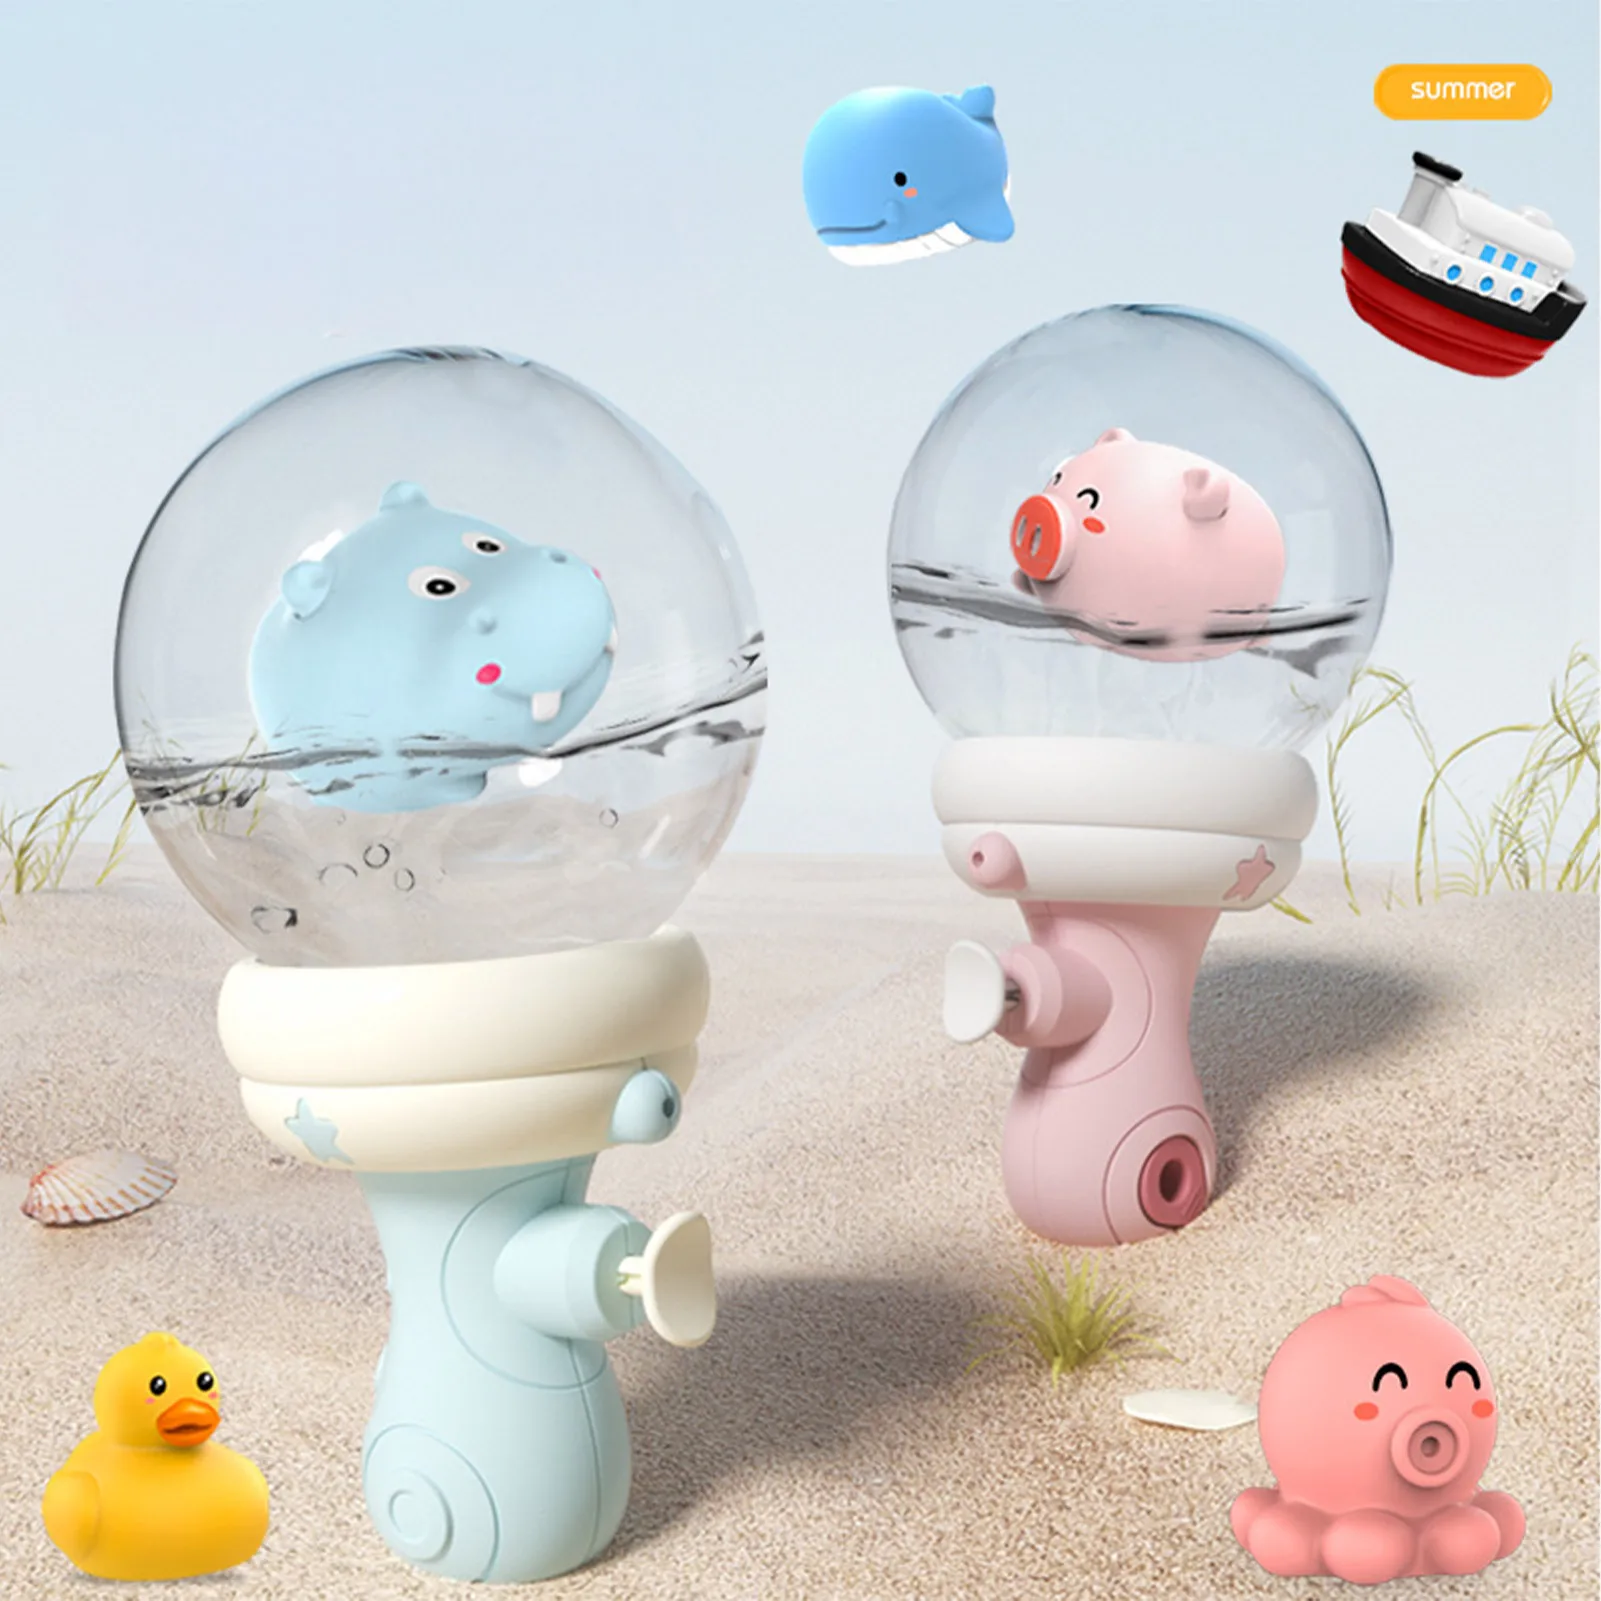 

Hippo Pig Bath Toys for Kids Water Guns Toy with Light Drifting Bottle Water Guns for Children Outdoor Beach Pool Toys Game